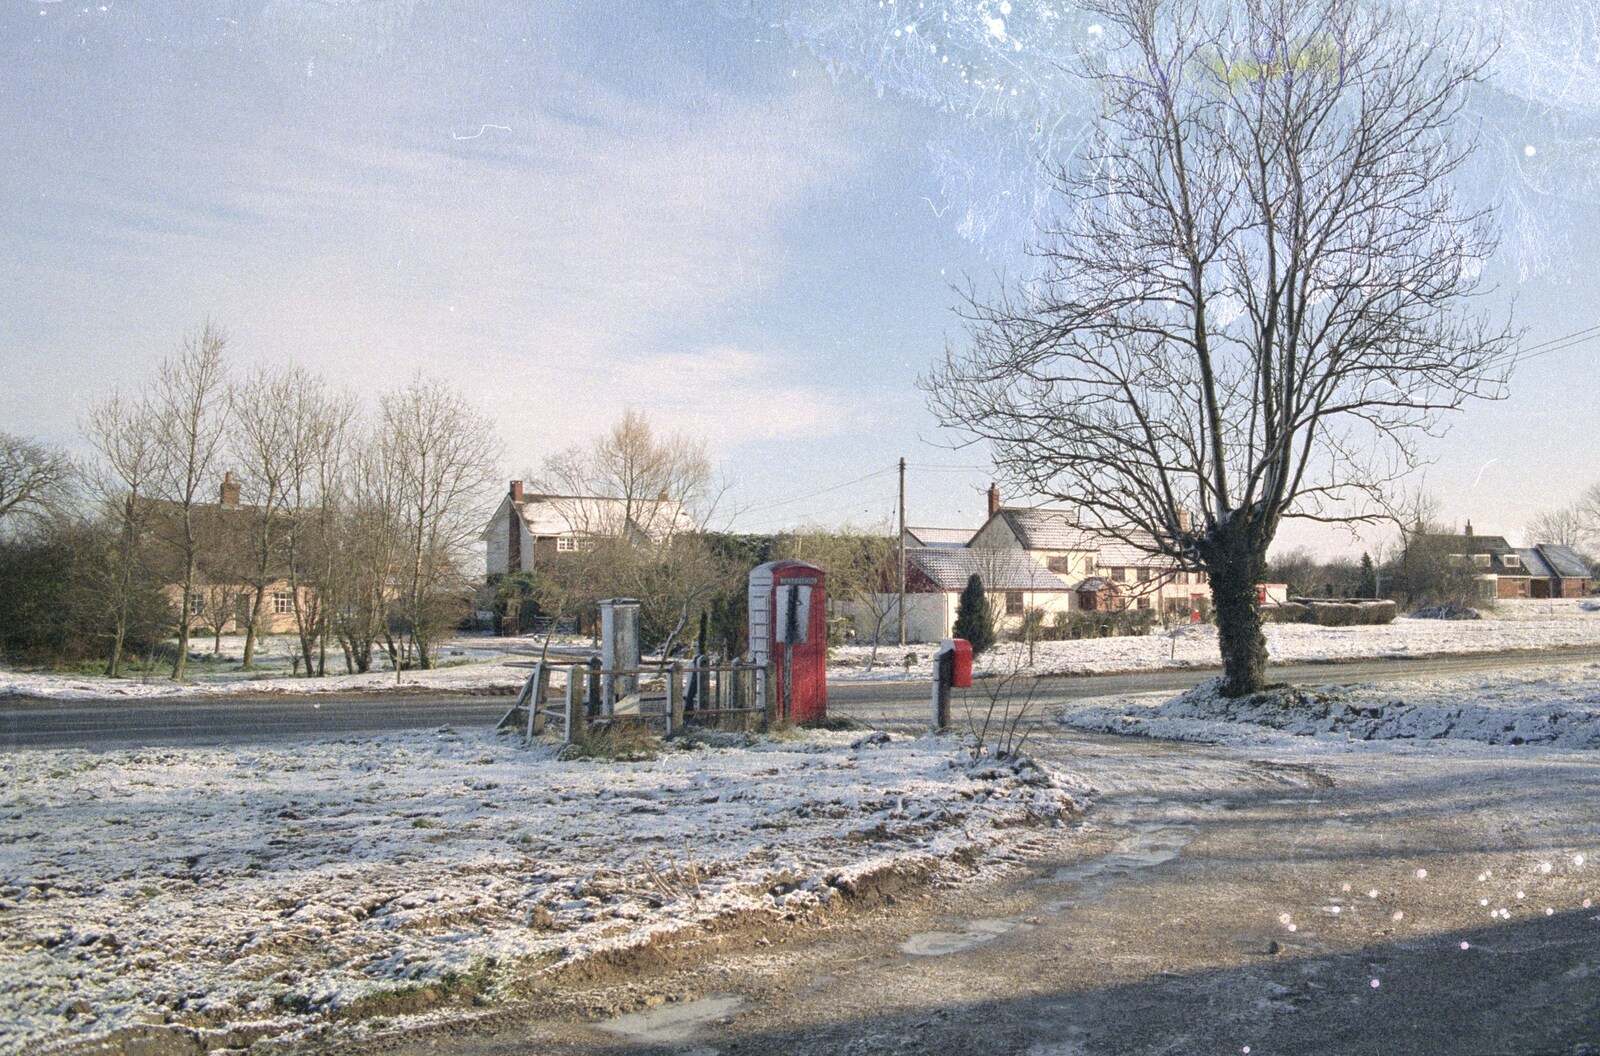 The K6 phonebox on Stuston Common from Kenny's Nibbles, St. Paul's and Sean's, Farnborough, London and Diss - 19th March 1990